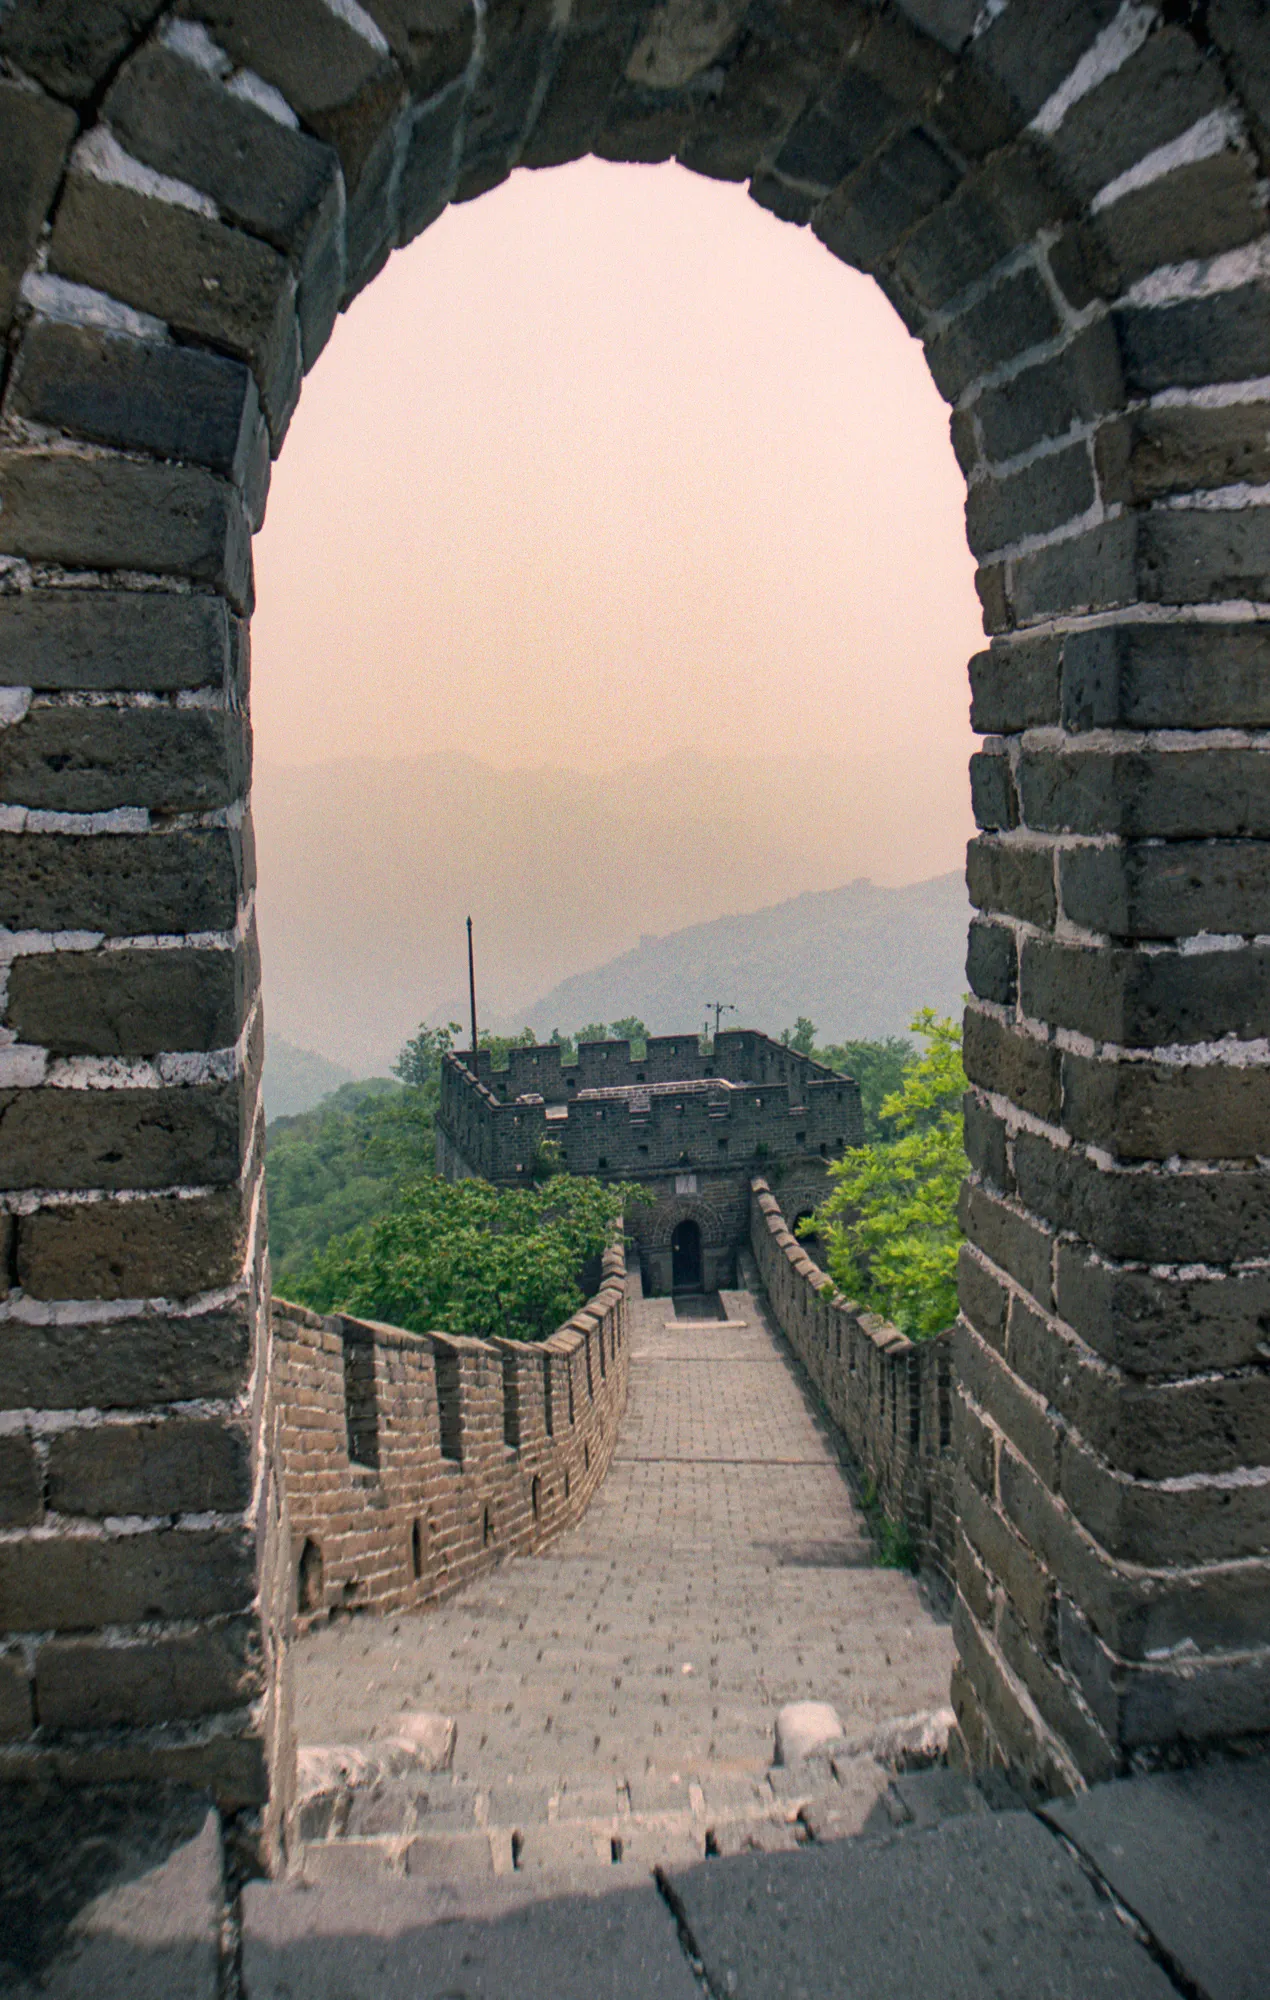 Looking down the Great Wall of China